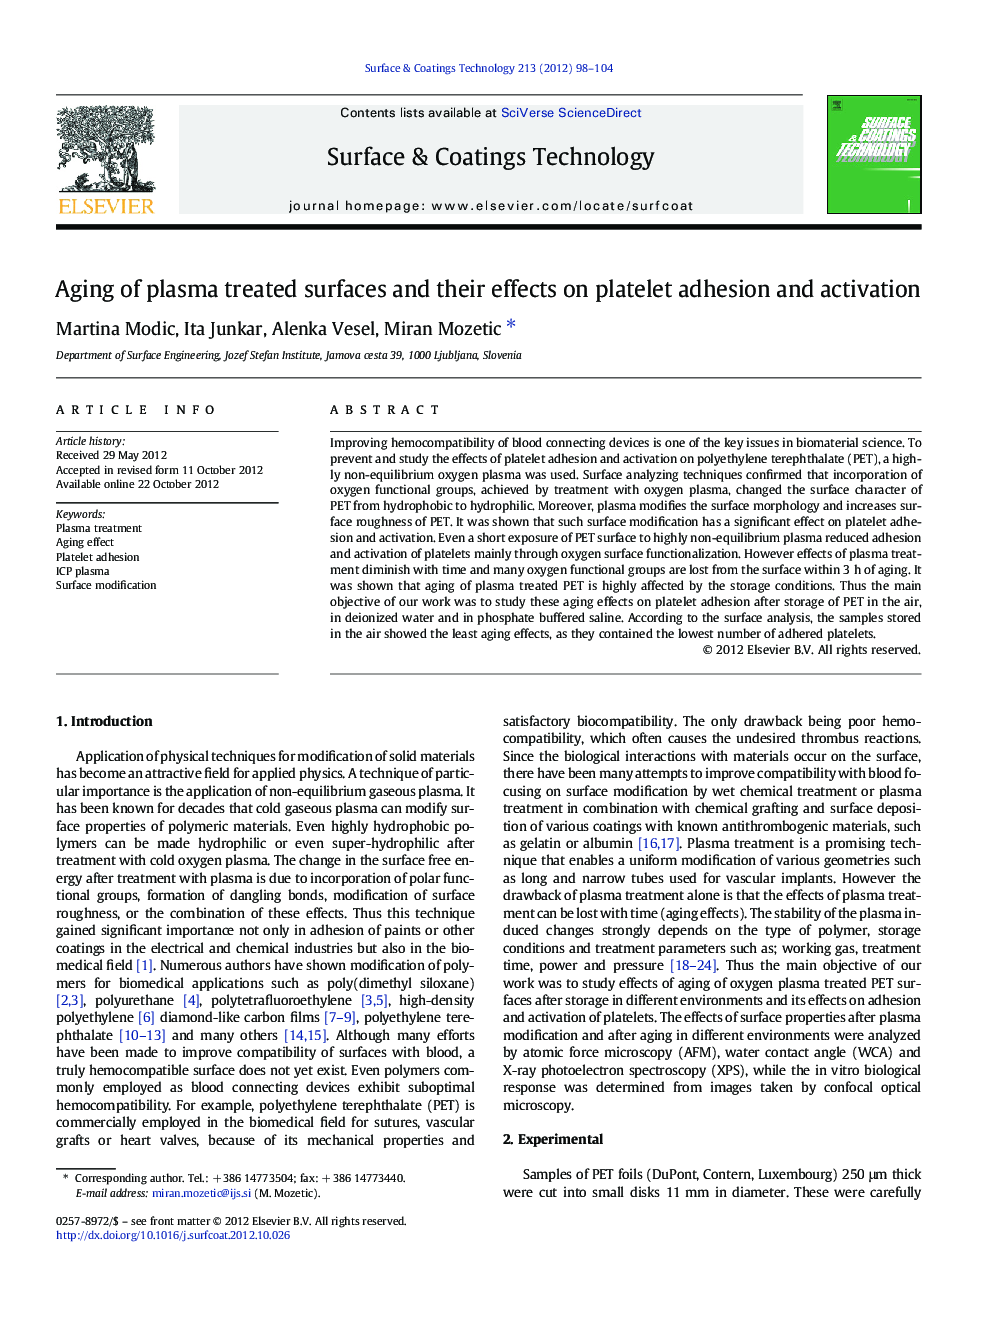 Aging of plasma treated surfaces and their effects on platelet adhesion and activation